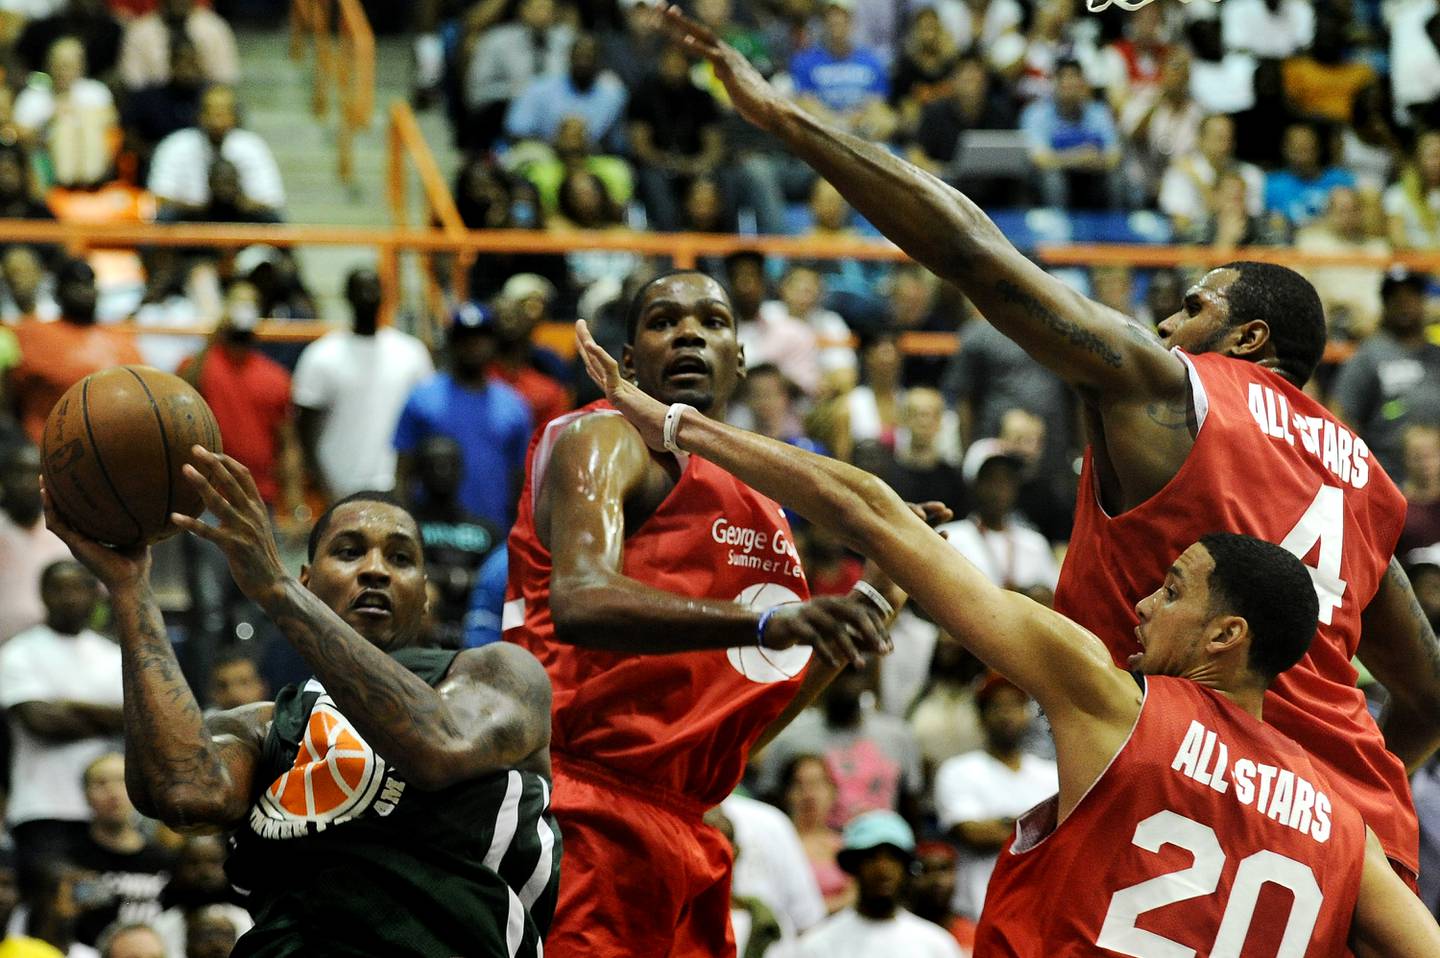 Carmelo Anthony looks for an open teammate during the Goodman League All-Stars taking on The Melo League basketball game at Edward P. Hurt Gymnasium at Morgan State University on August 30, 2011.